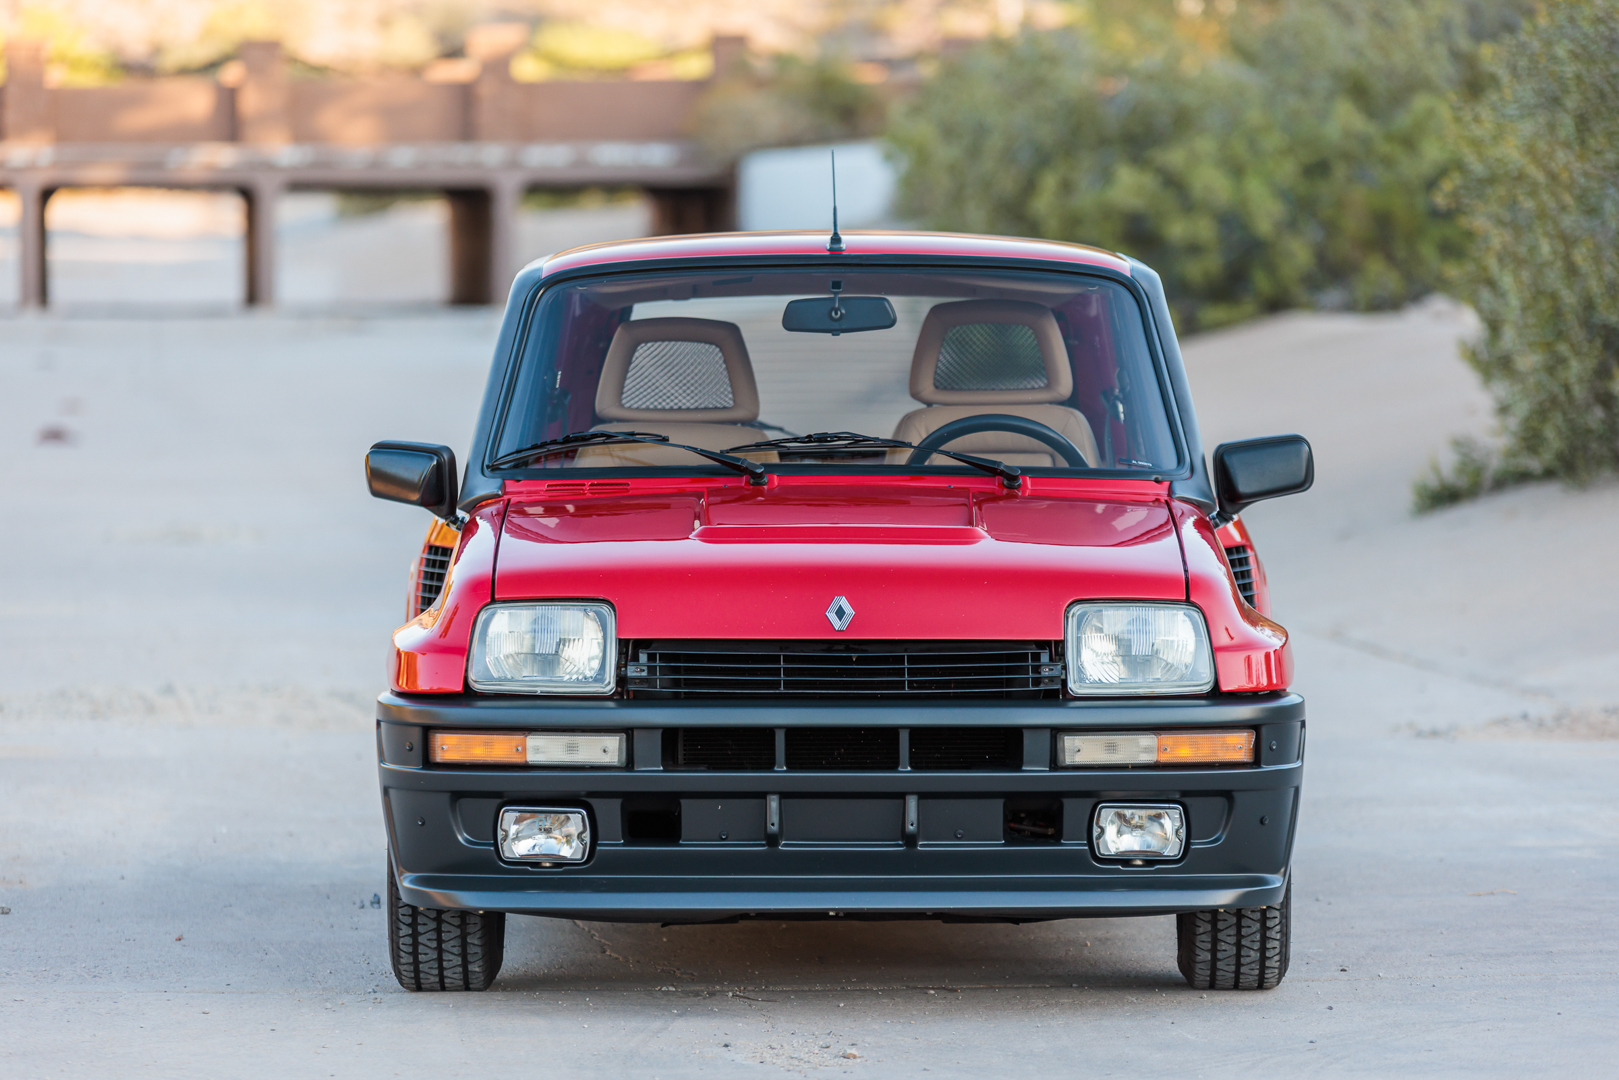 The Renault 5 Turbo's cult status is timeless, and it's still worth tens of millions6